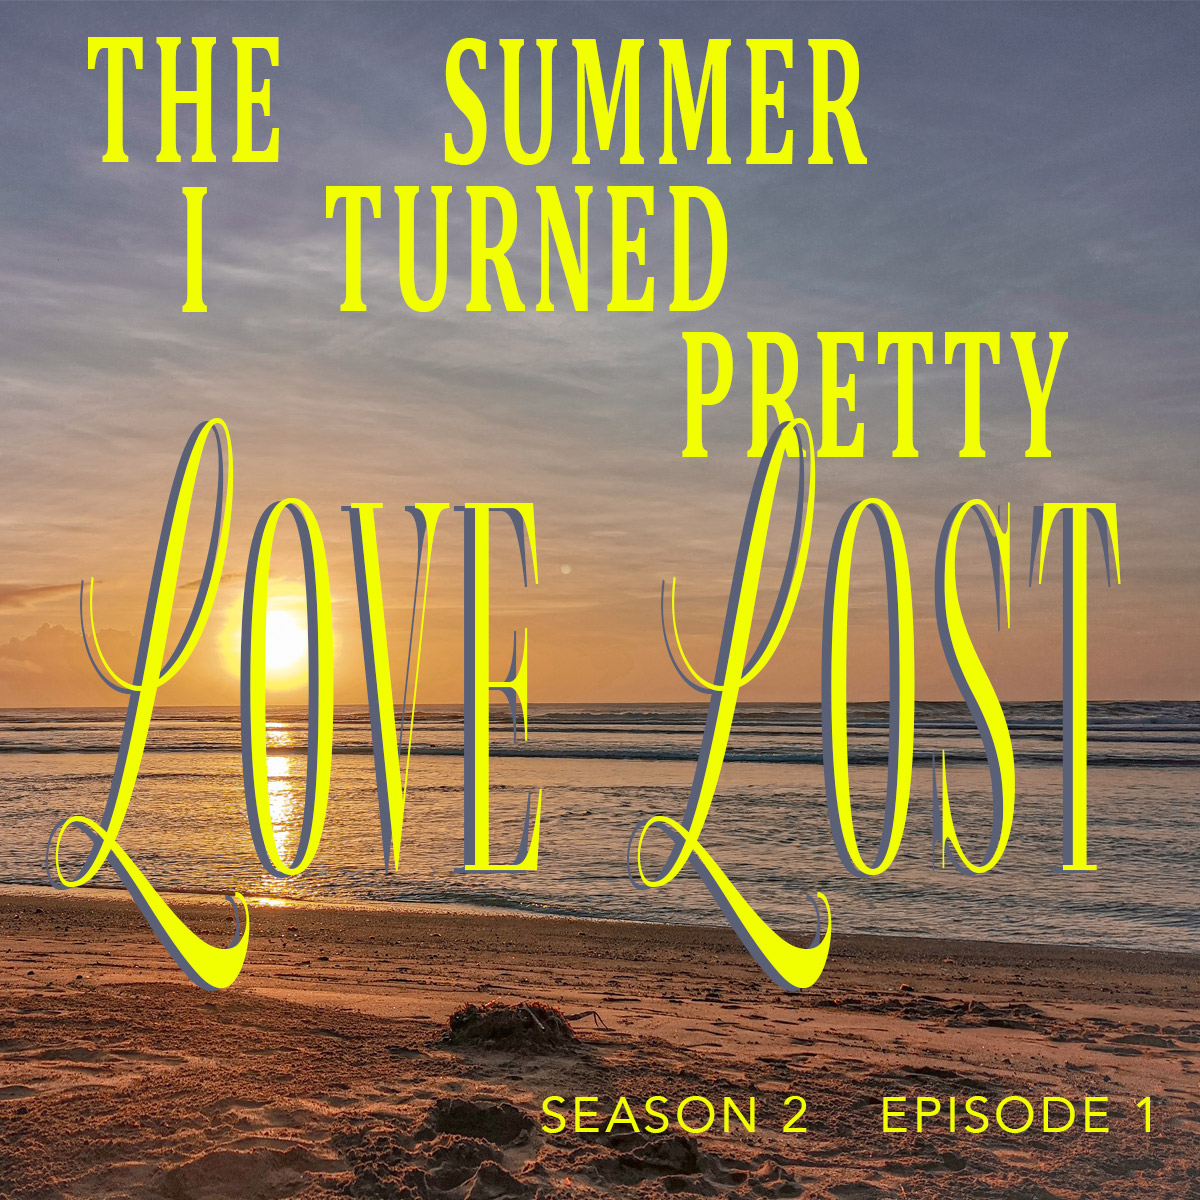 Graphic for the streaming series The Summer I Turned Pretty, Season 2 Episode 1 Love Lost